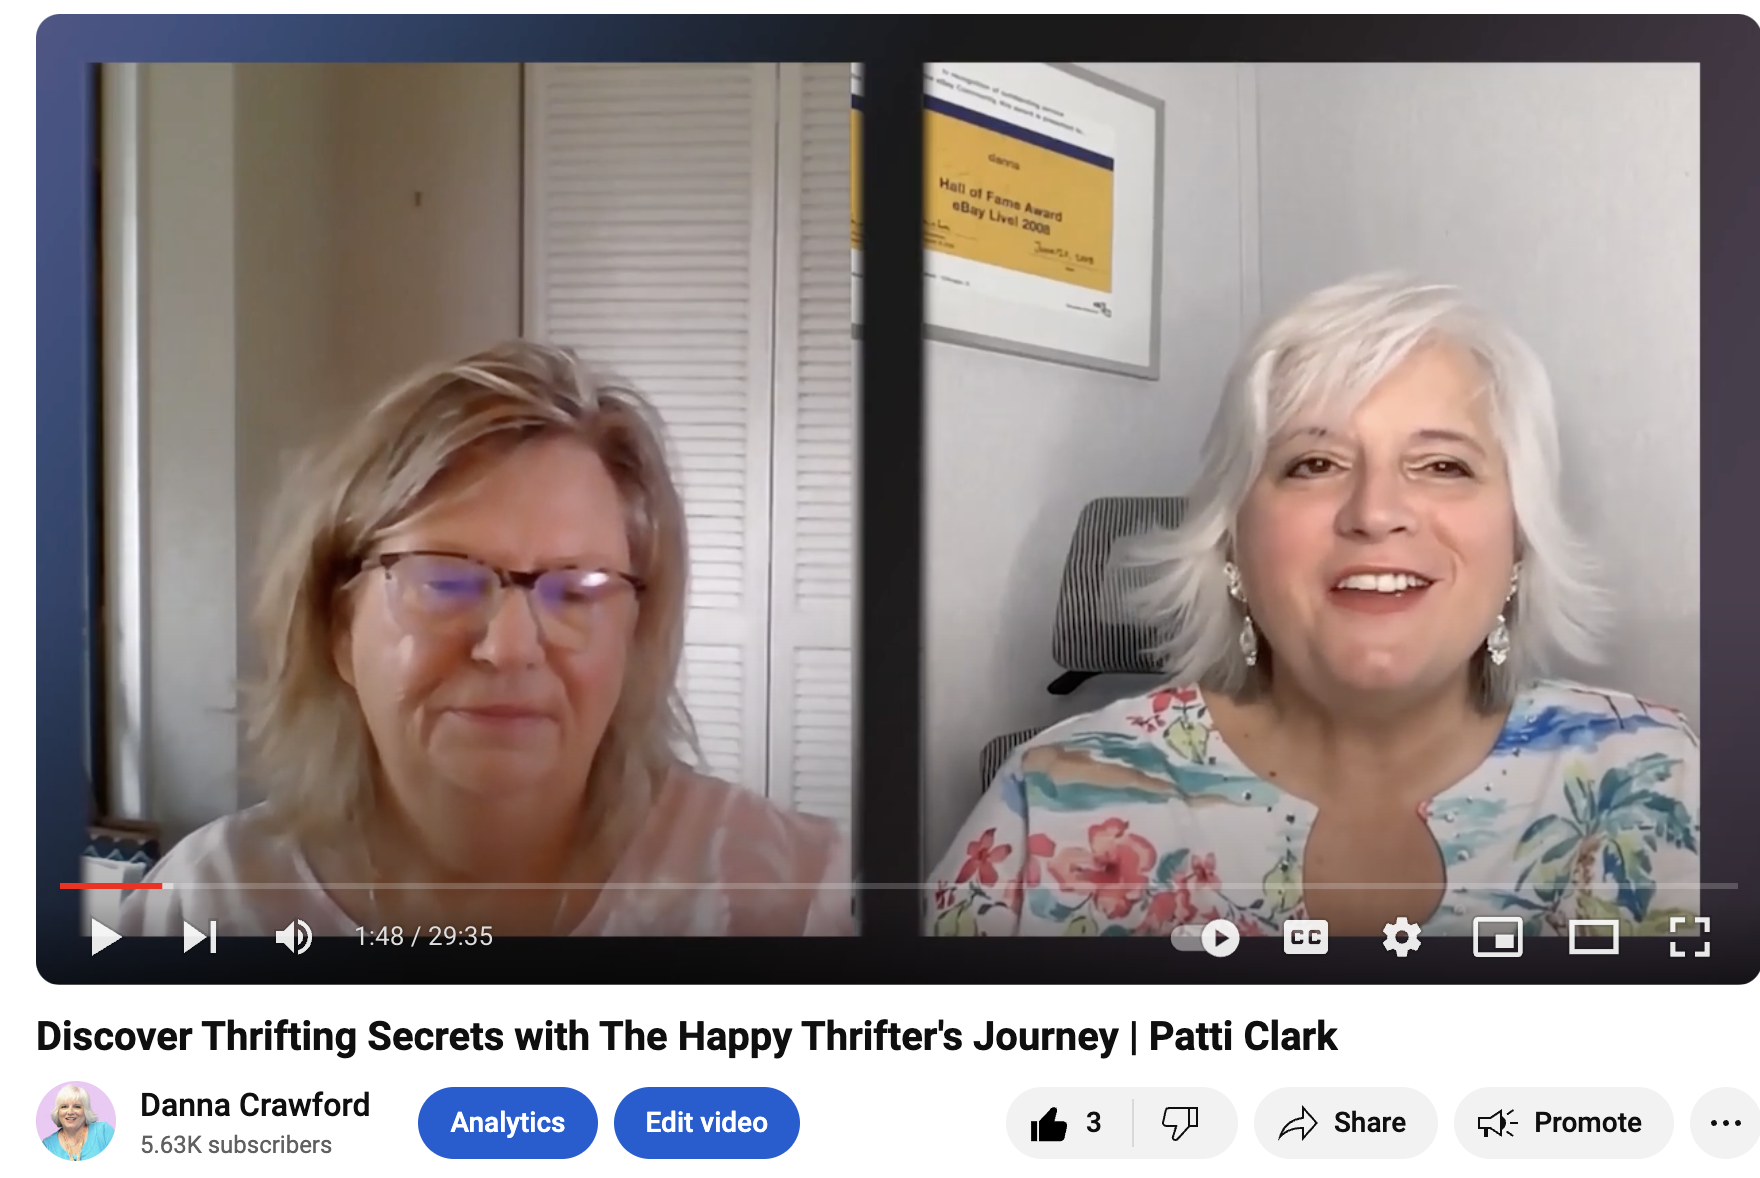 Introducing Patty Clark, founder of The Happy Thrifter Shopper